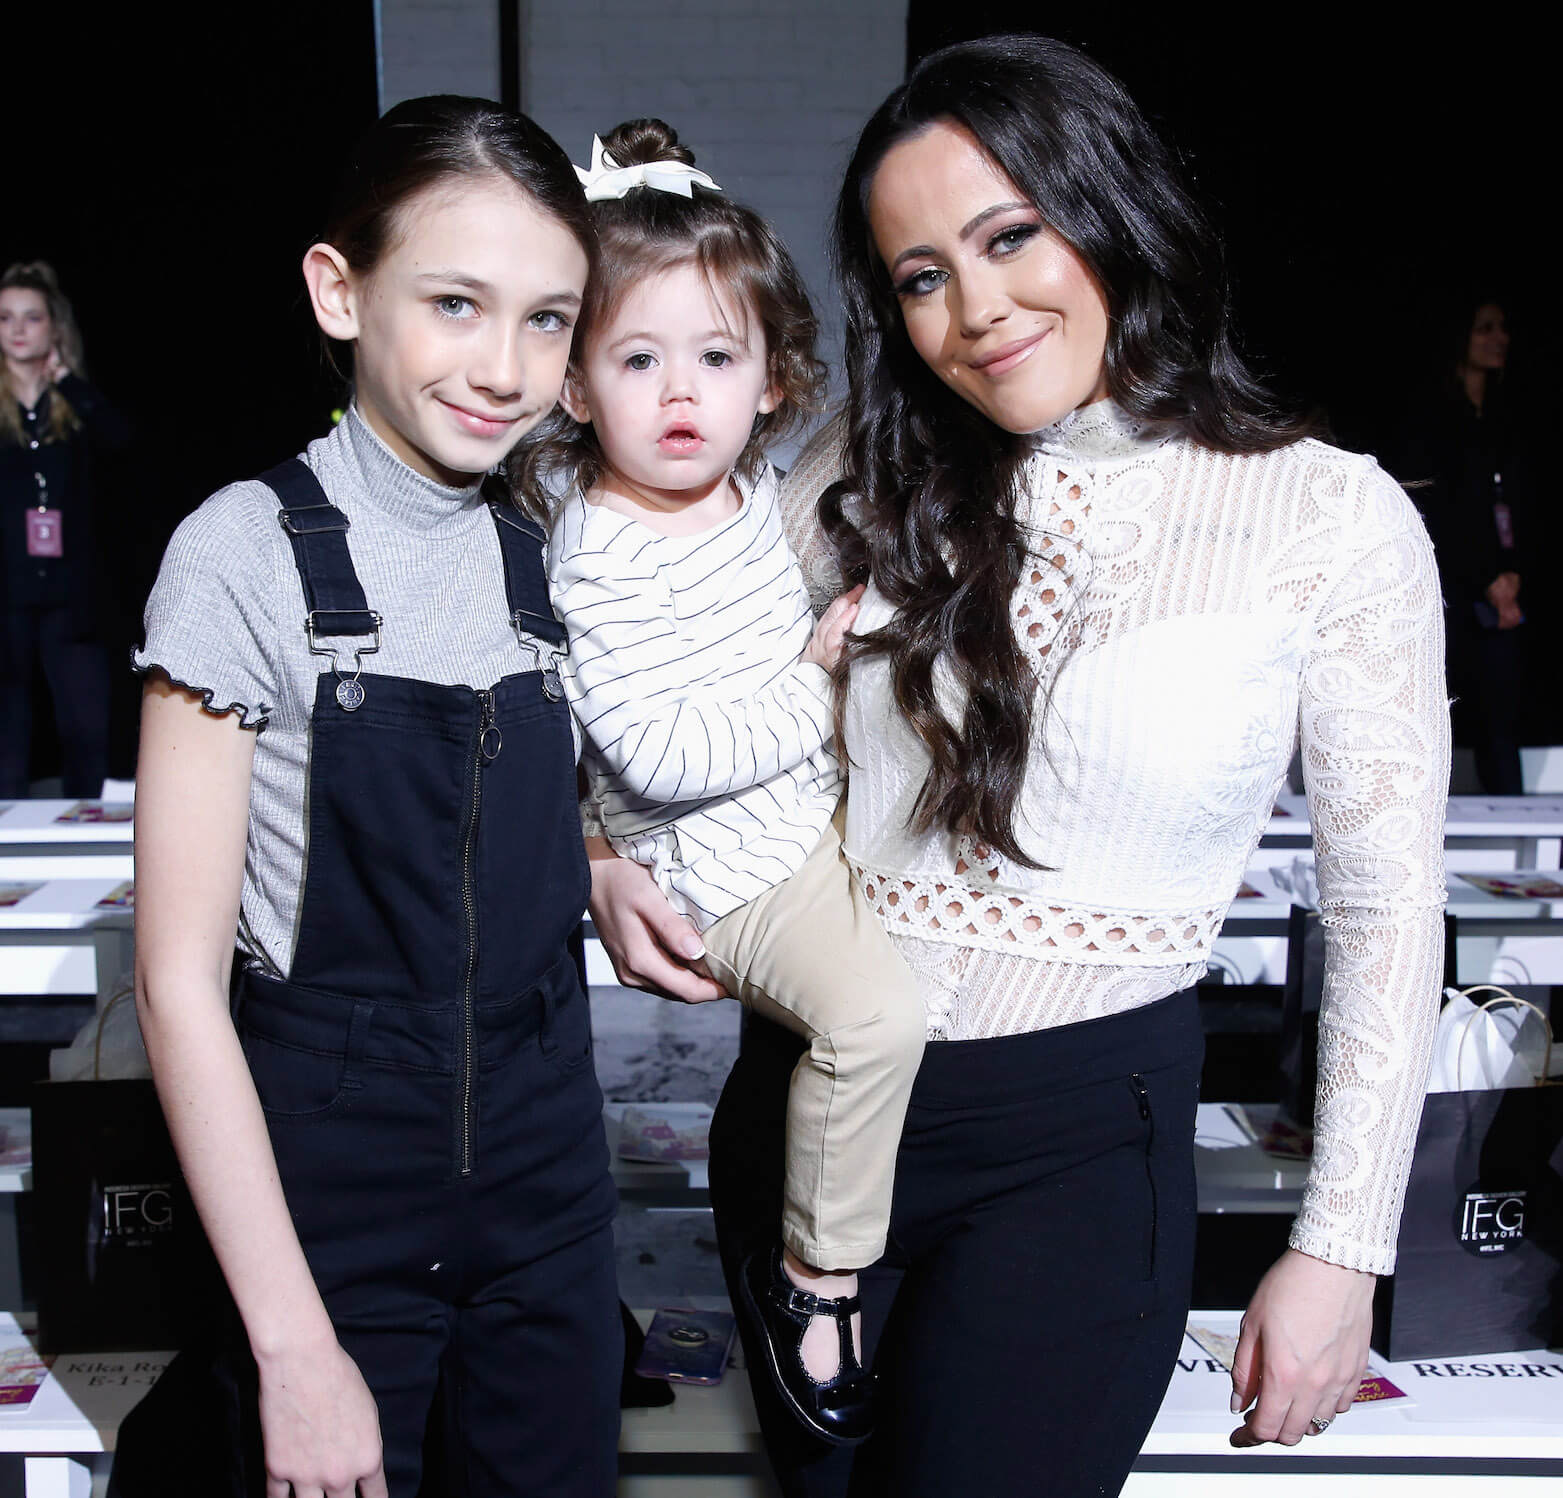 Jace Vahn Evans, Ensley Jolie Eason, and Jenelle Evans from 'Teen Mom 2' fame standing together and smiling at an event